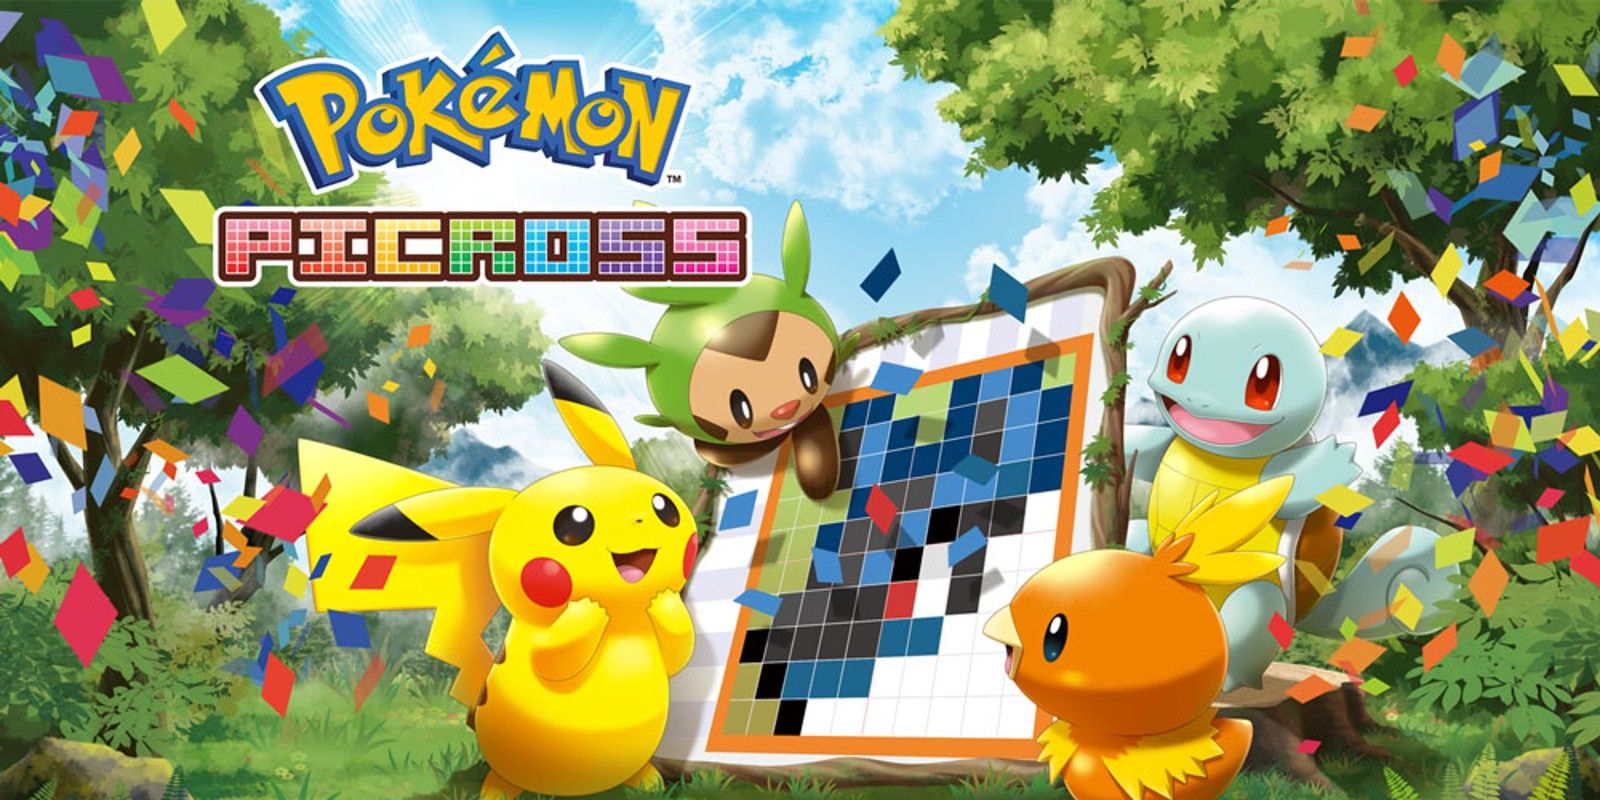 Pikachu, Chespin, Torchic, and Squirtle play Pokemon Picross